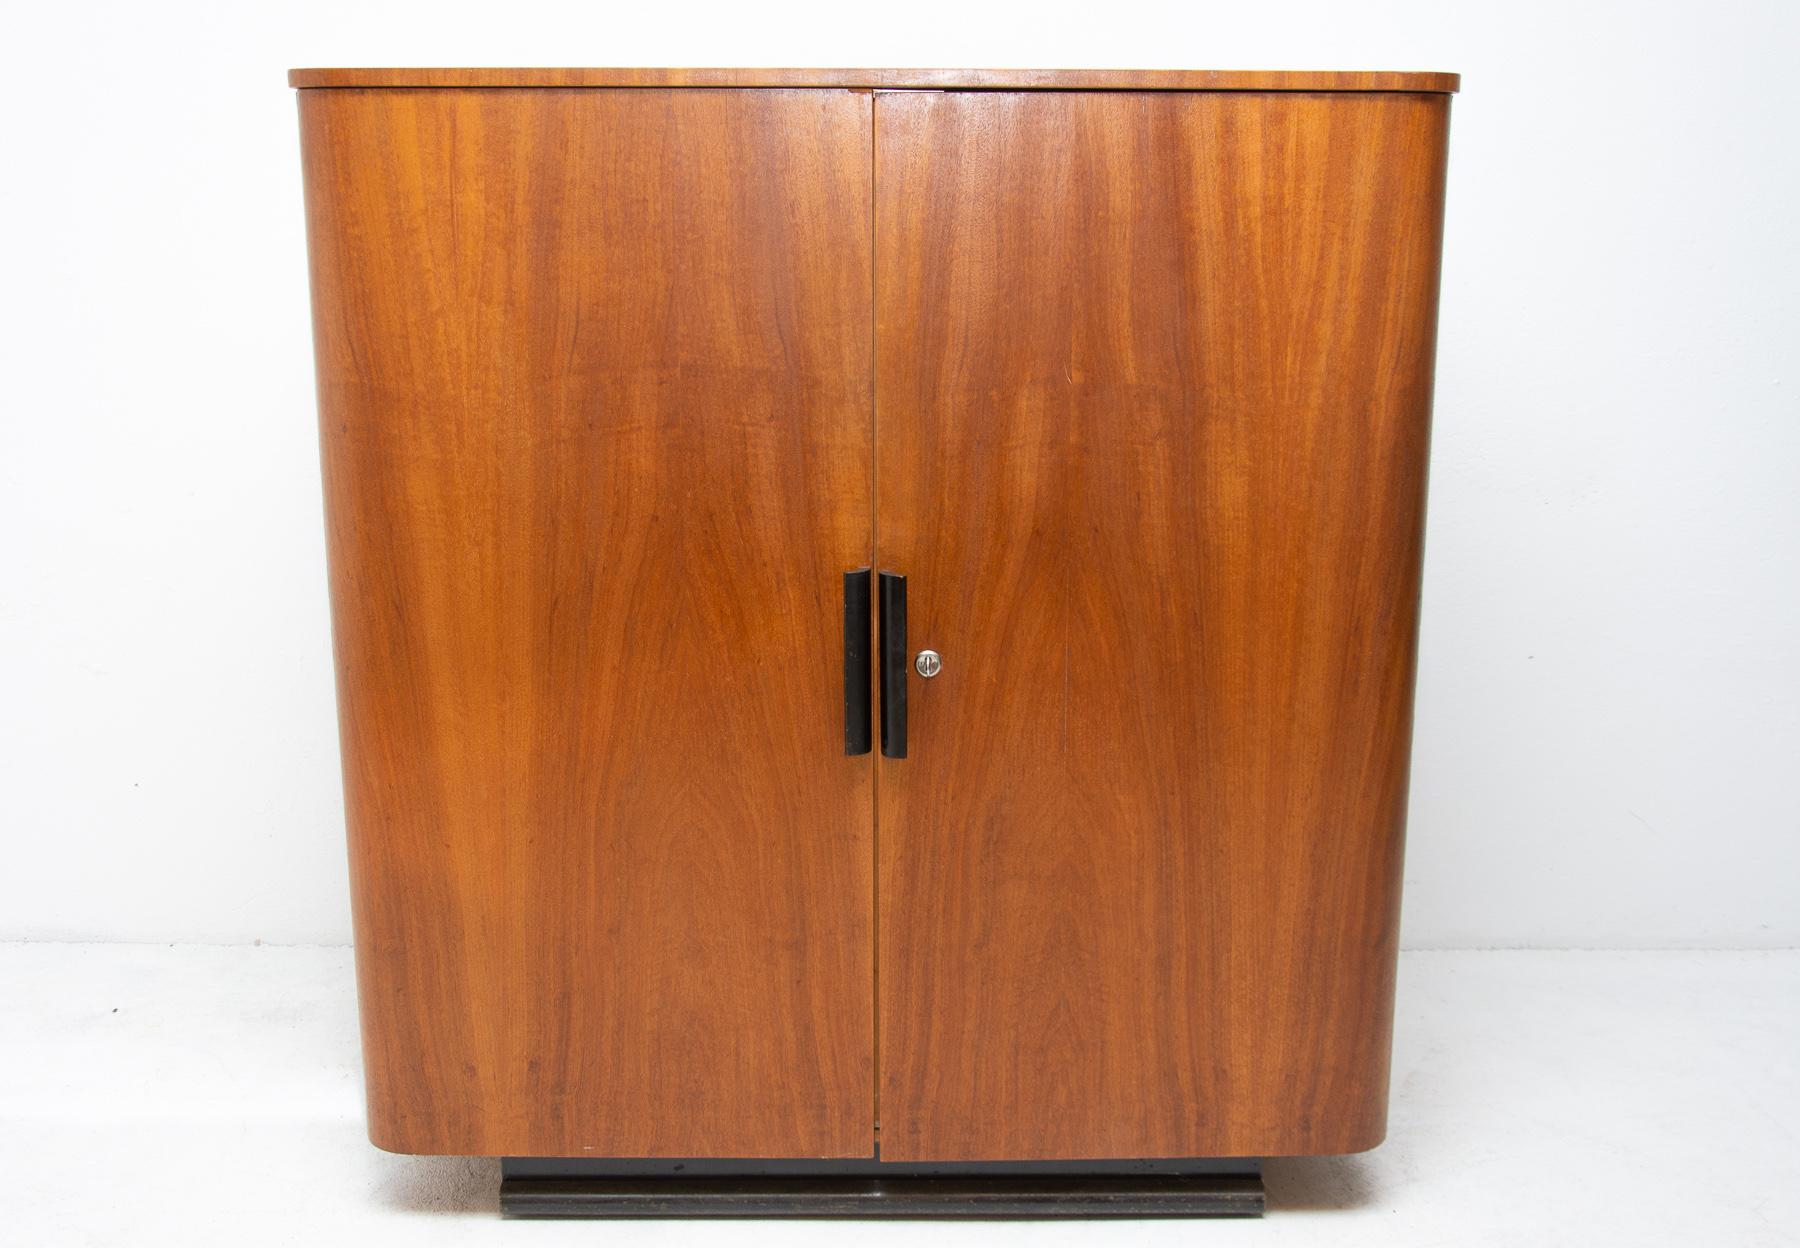 This walnut cabinet, small wardrobe or secretary it can be used for bedding, clothes, documents, papers etc. It´s part of a complete bedroom suite by Jindrich Halabala, circa 1940. Black painted pedestal, and handles. Inside the cabinet are four